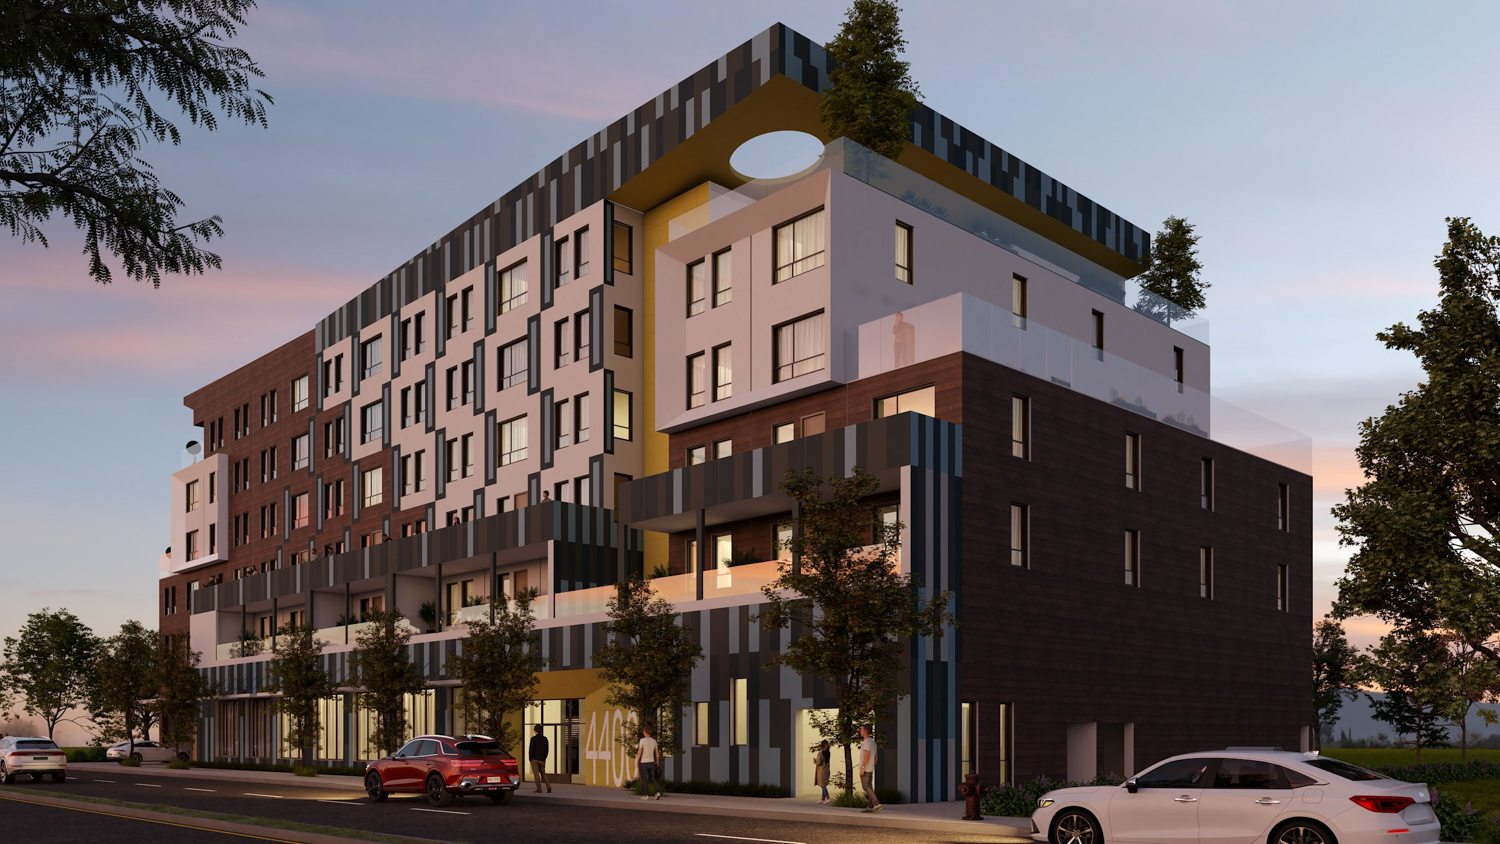 The Refuge Apartments at 4400 Martin Luther King Jr Way, rendering by